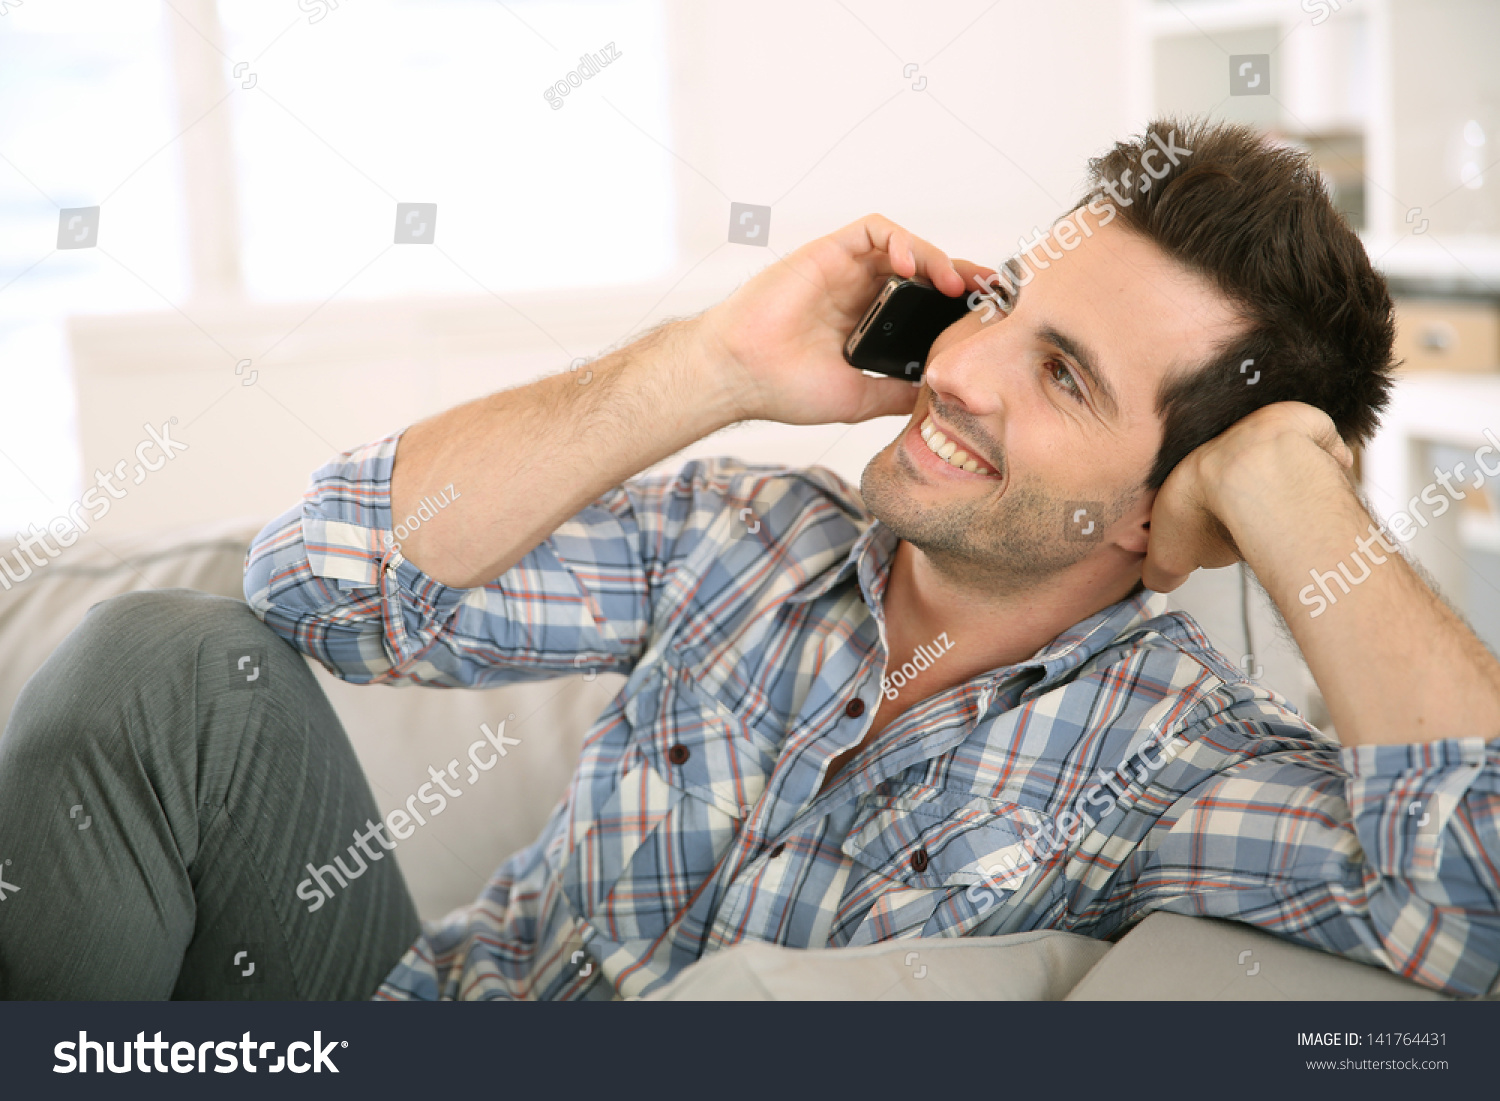 http://image.shutterstock.com/z/stock-photo-young-man-at-home-talking-on-mobile-phone-141764431.jpg